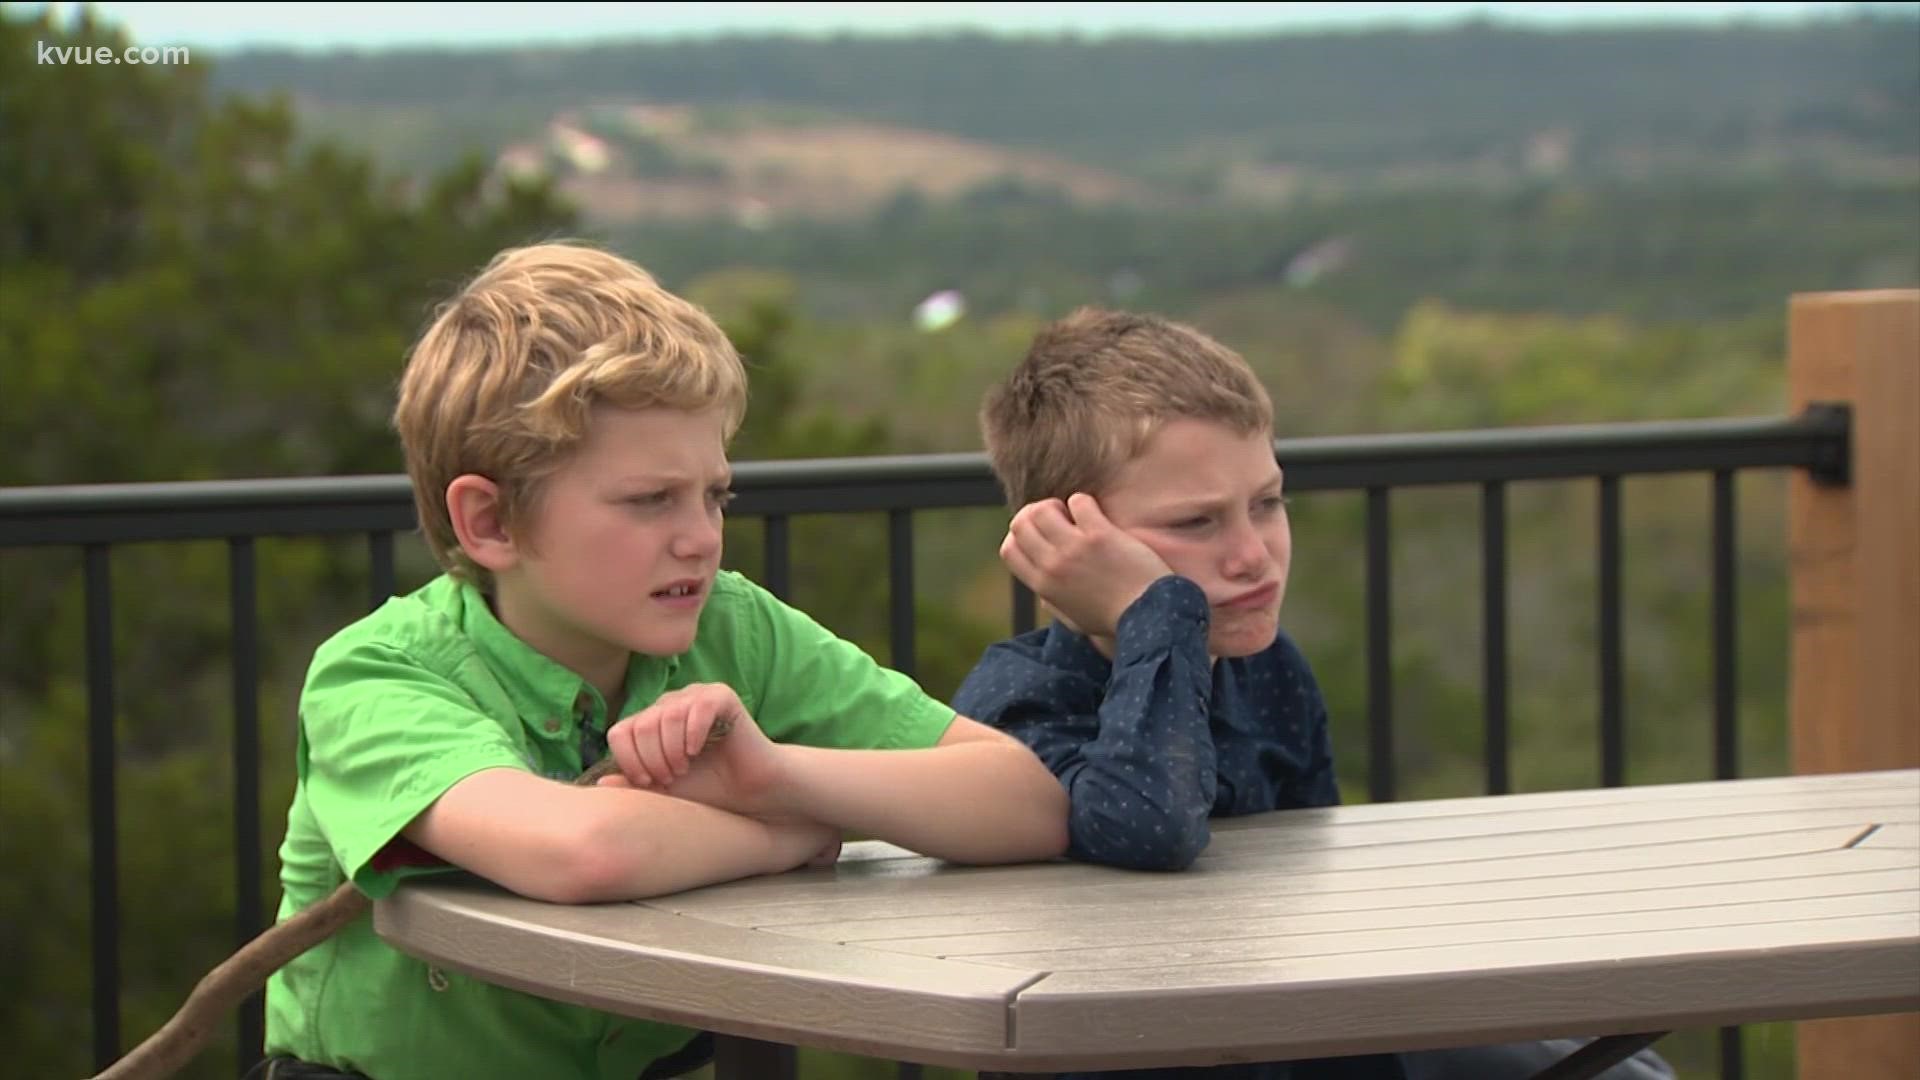 For this week's Forever Families, KVUE's Tori Larned and Hannah Rucker got to know twins Aiden and Marshall.